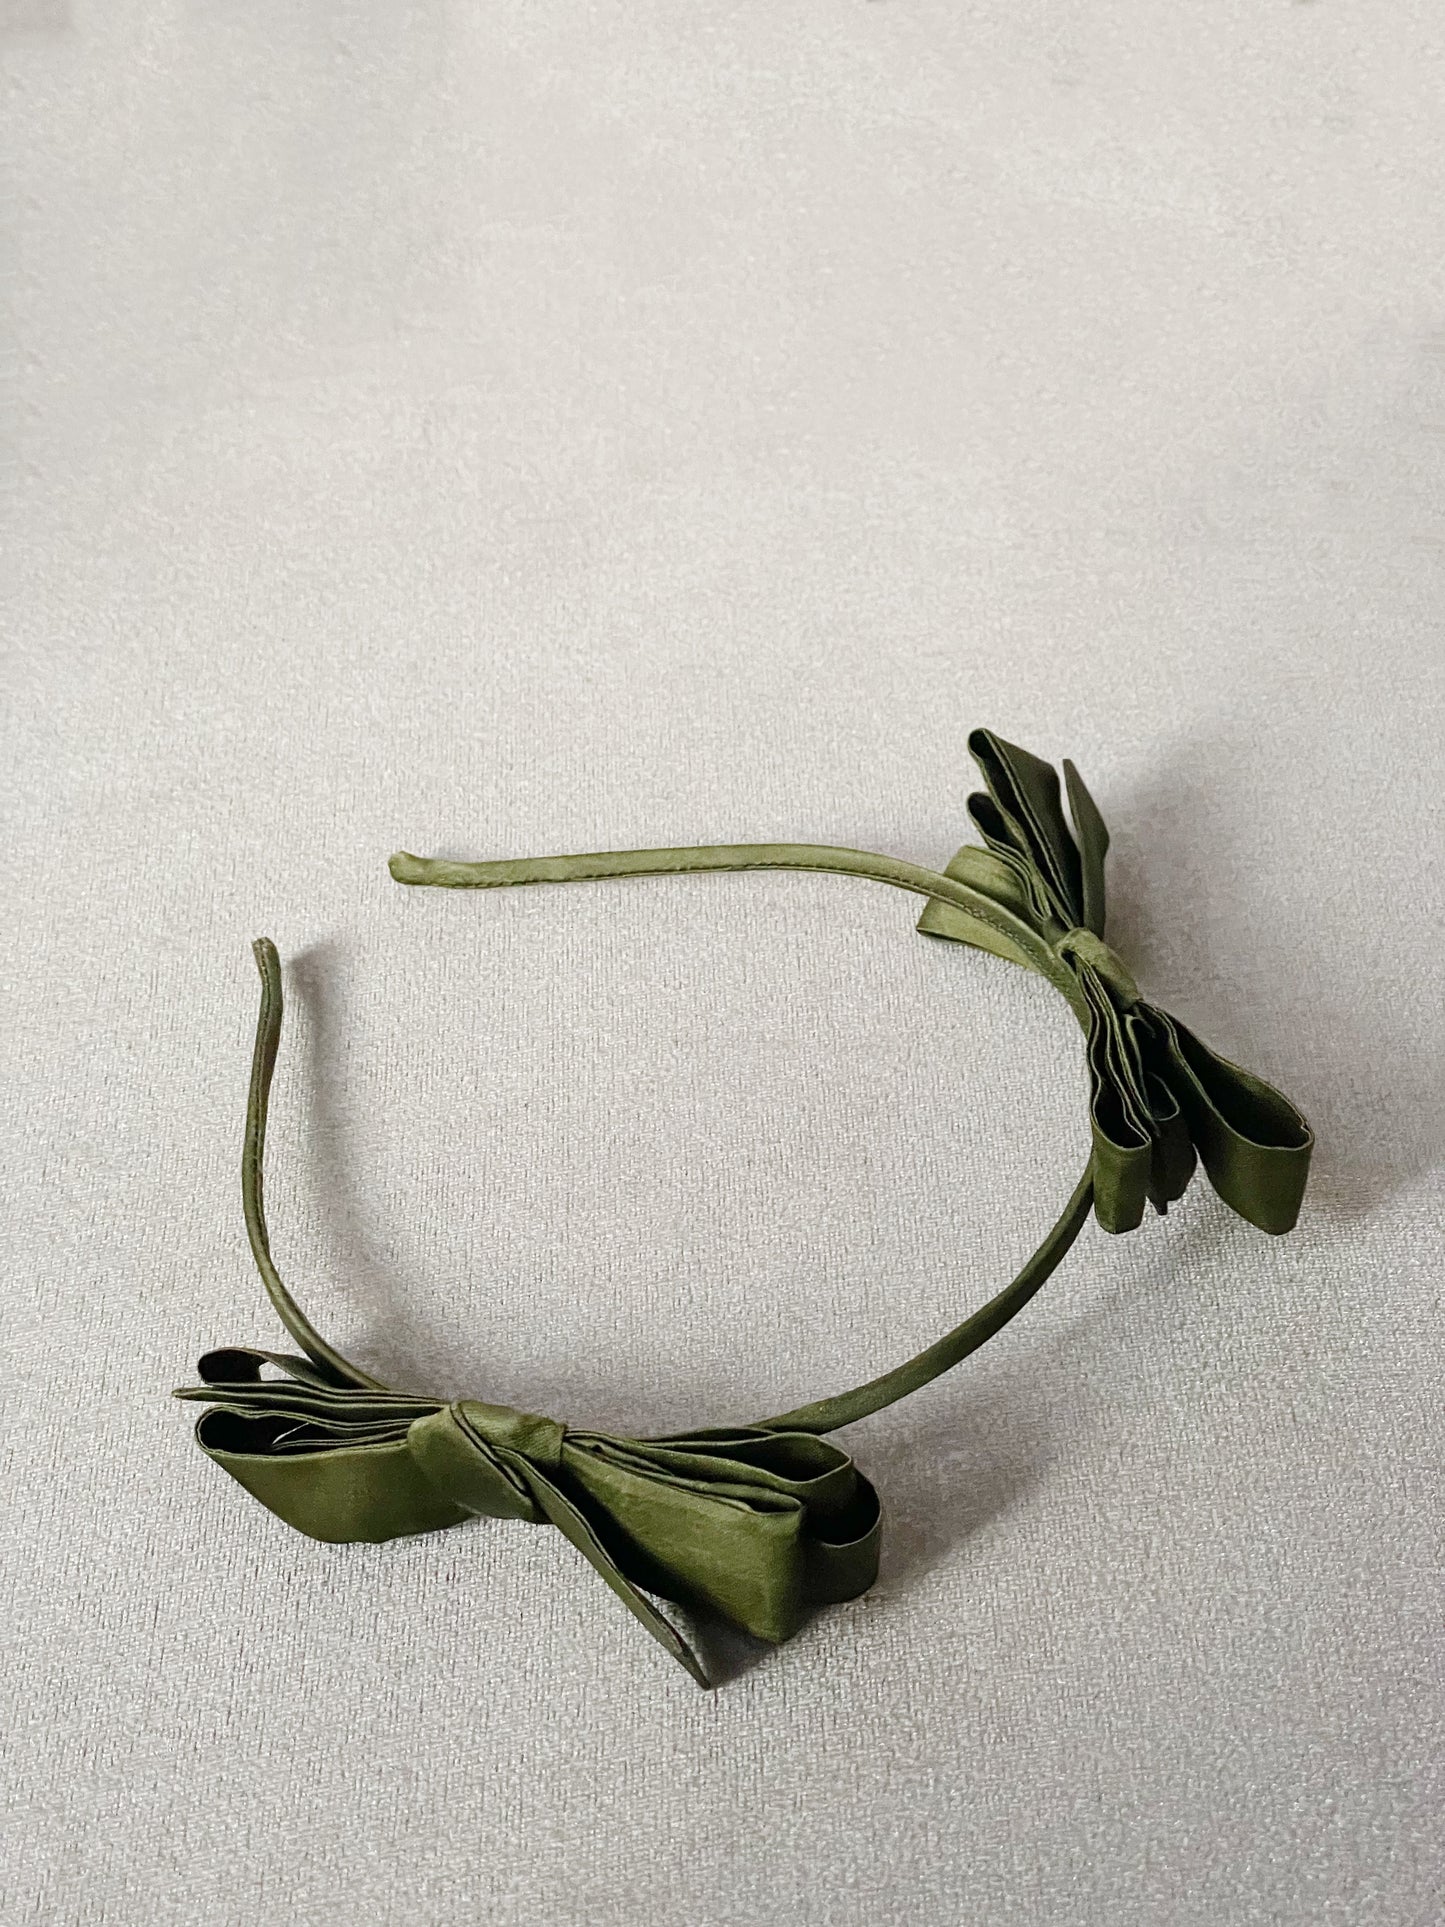 Alouette Double Bow Headband (more colors available)